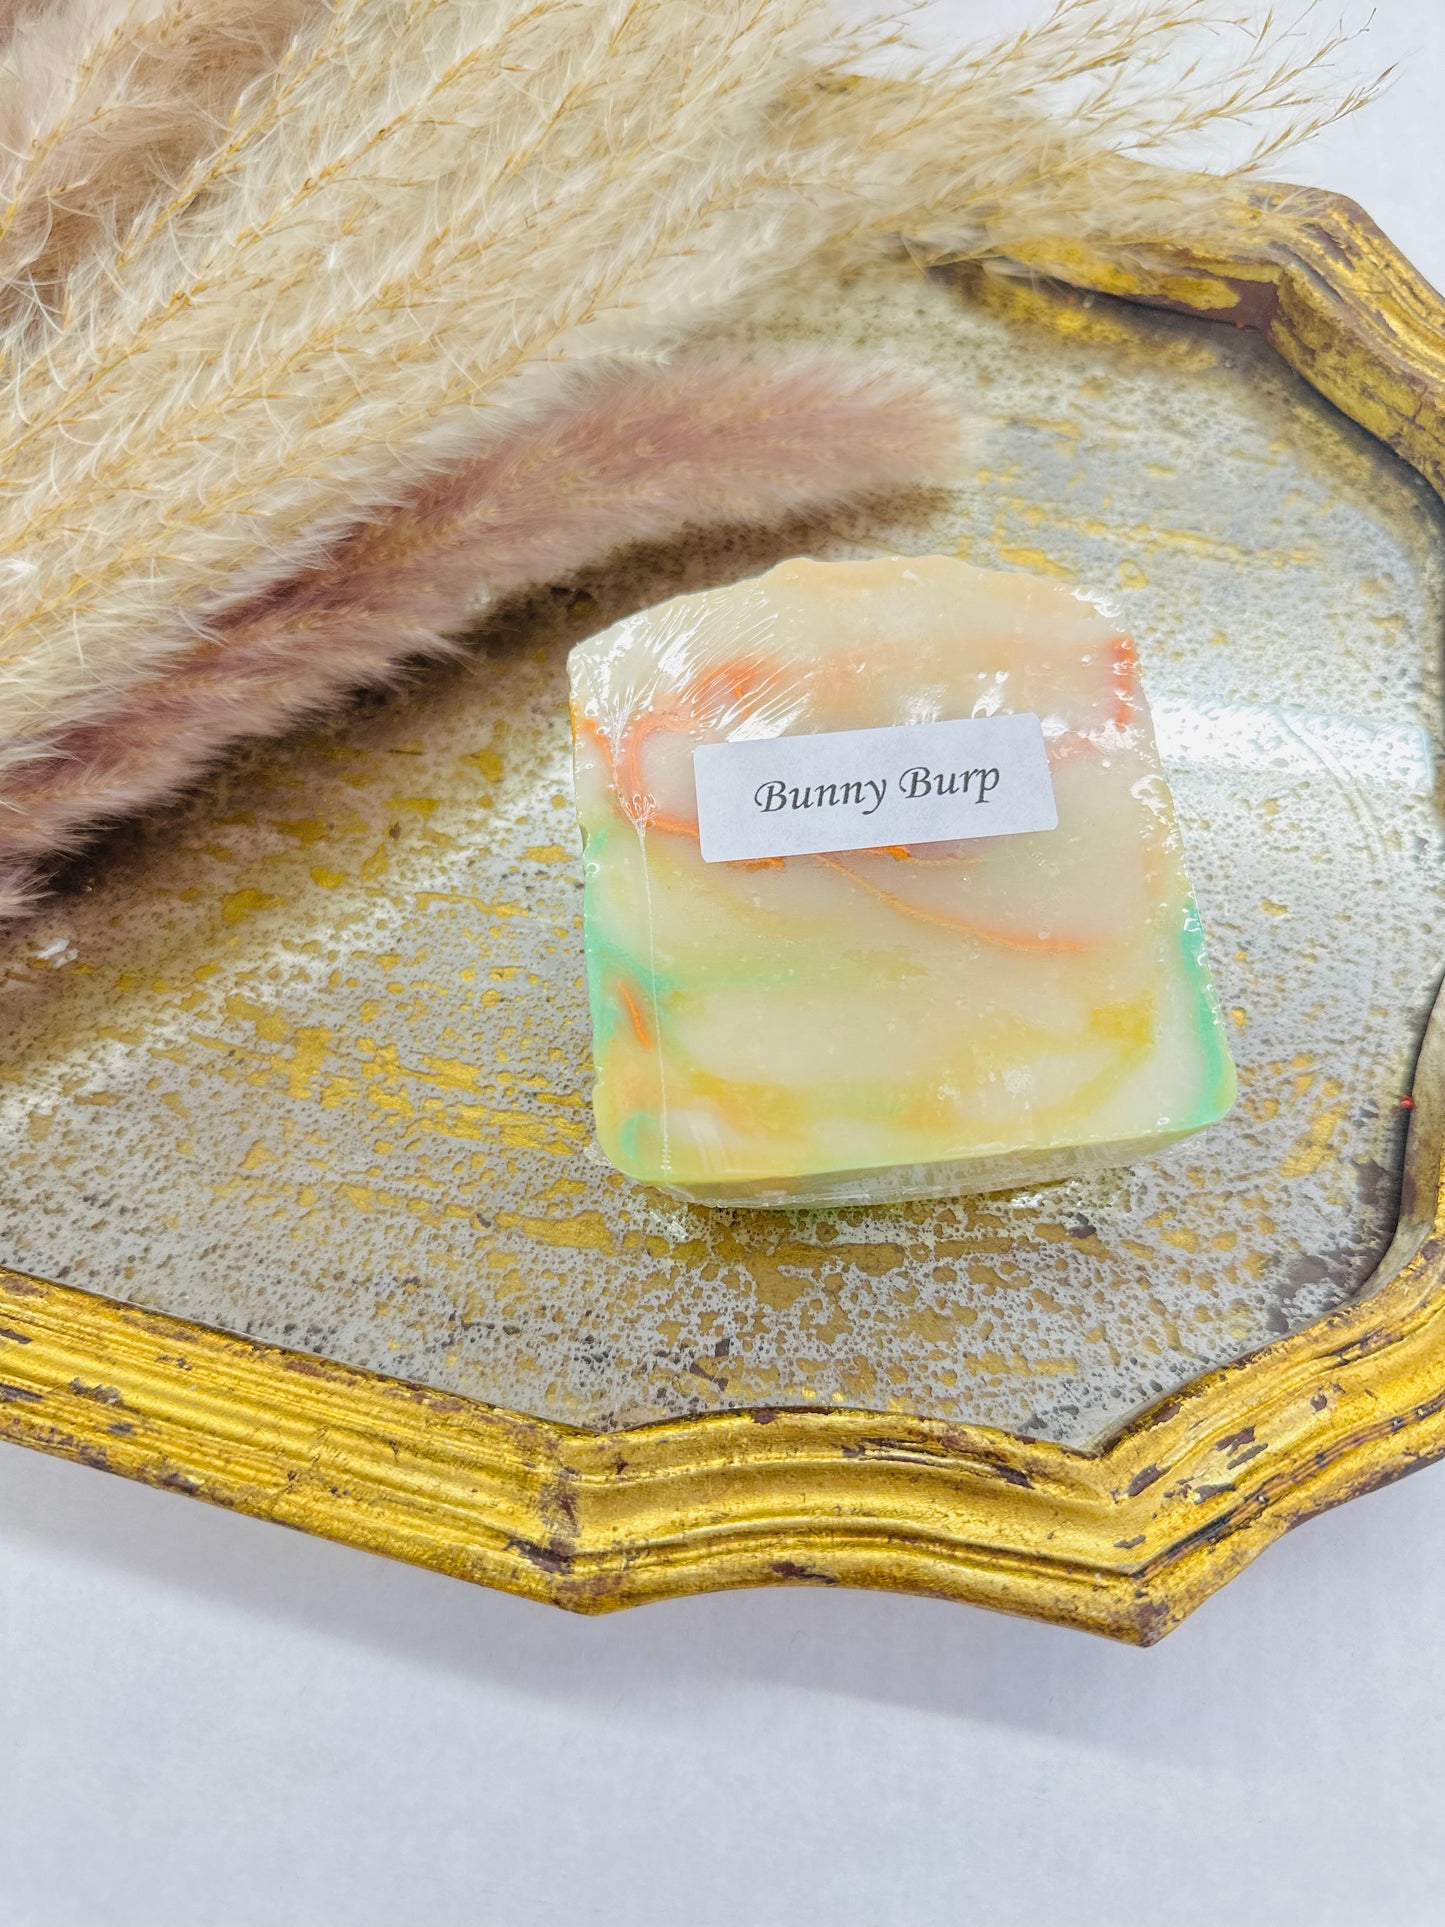 HAND AND BODY SOAP